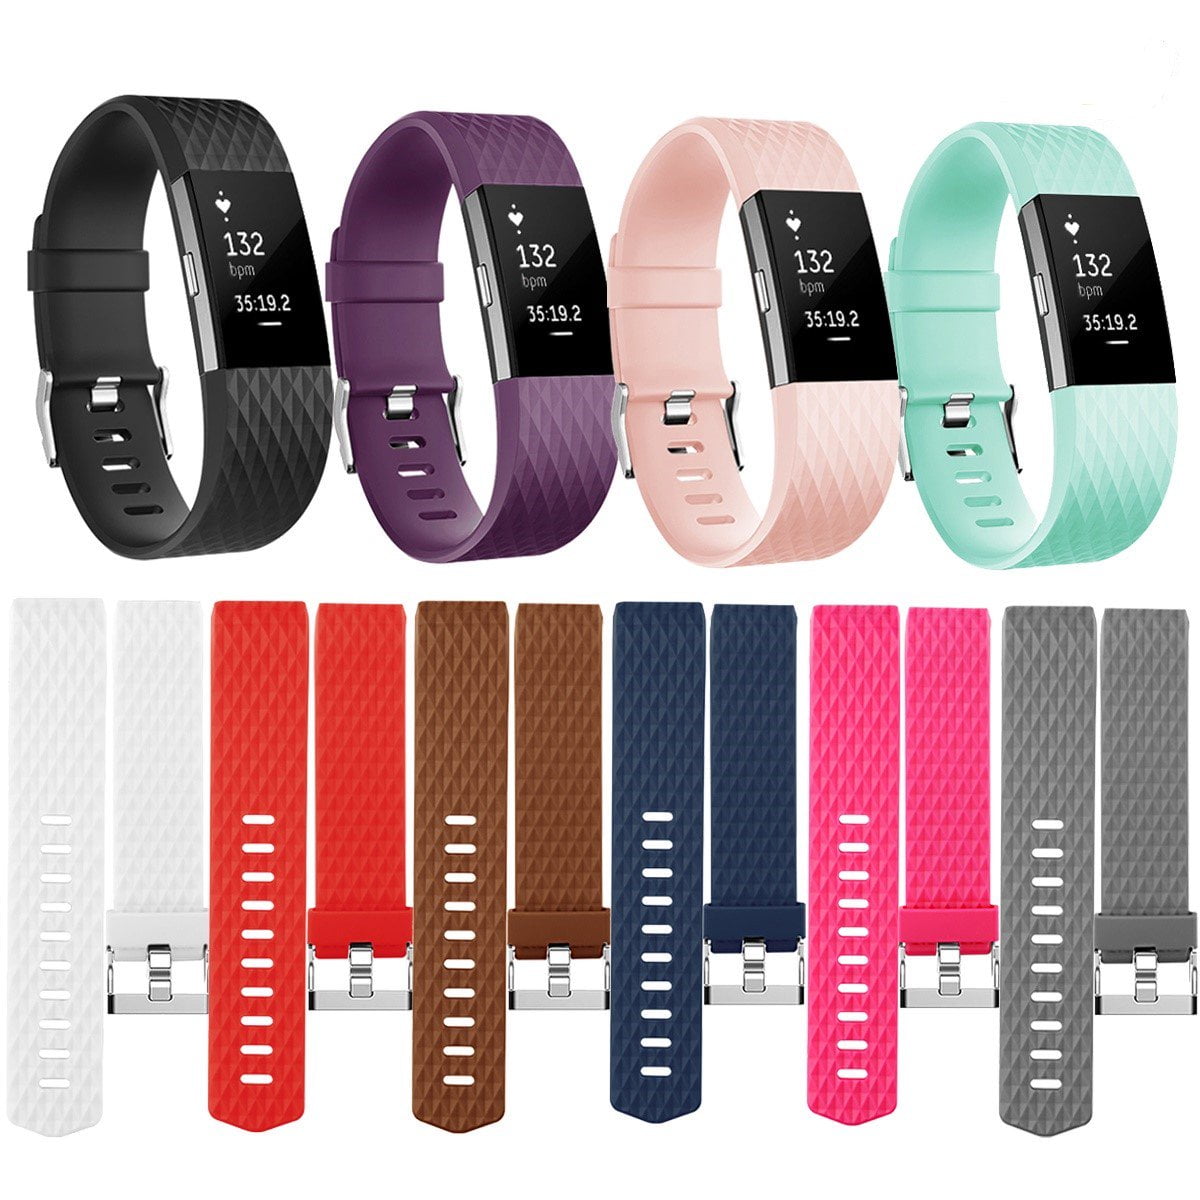 Fitbit Charge 2 Strap Replacement Bands Silicone Fitness Wristband Large 10 Pack 